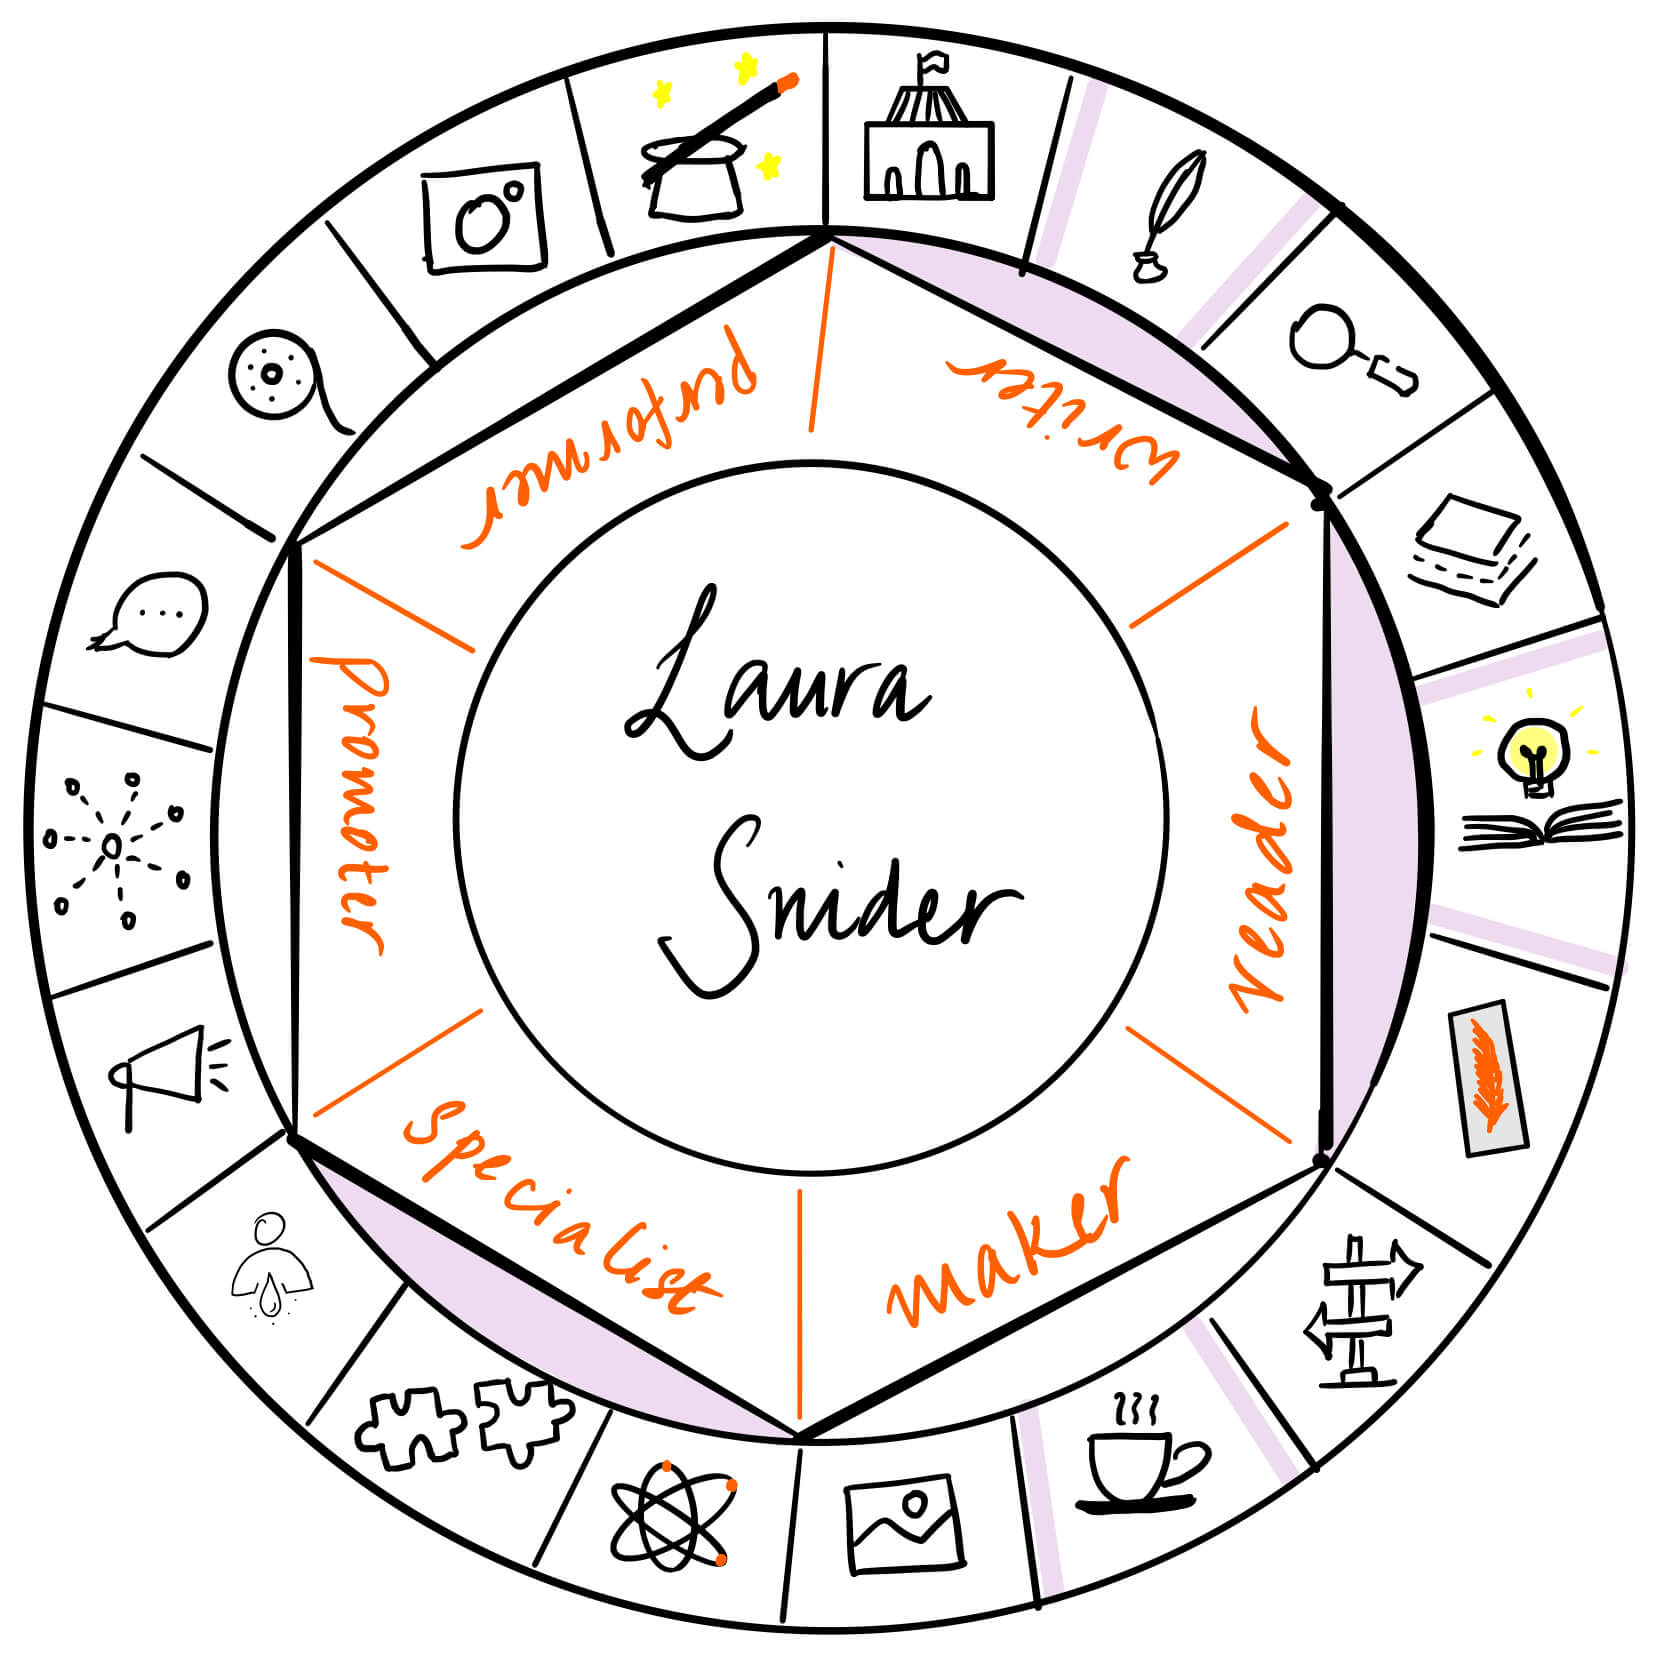 Laura Sndier is a writer, reader and specialist. It's a pleasure to have her over on The Creator's Roulette and learn more about our connection to characters.